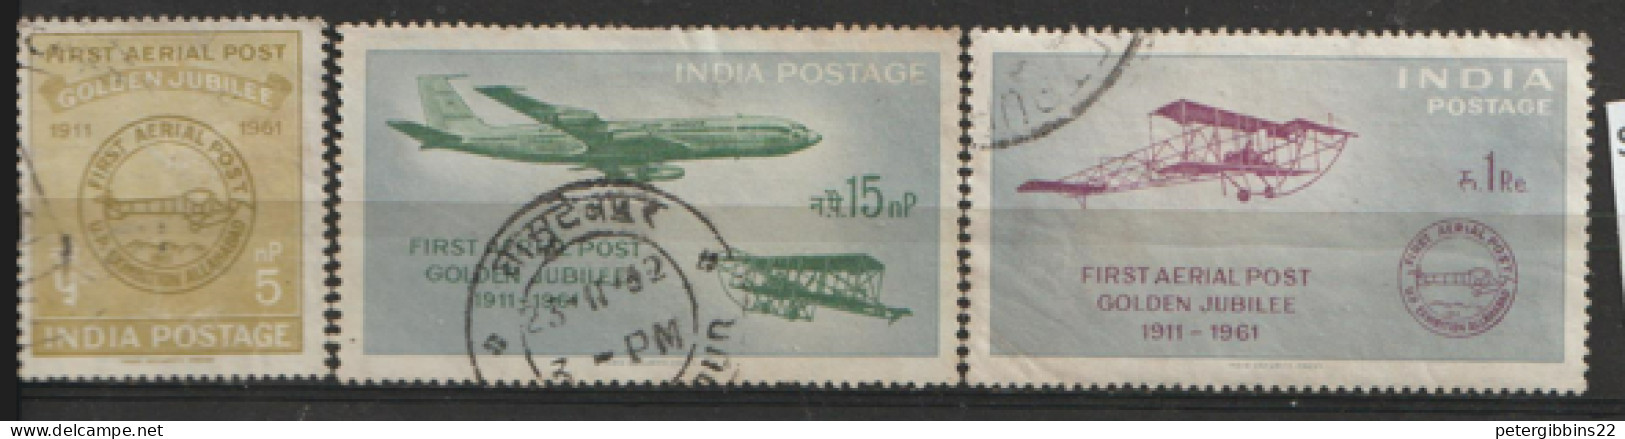 India  1960 SG  434-6  First Air Mail   Fine Used   - Gebraucht